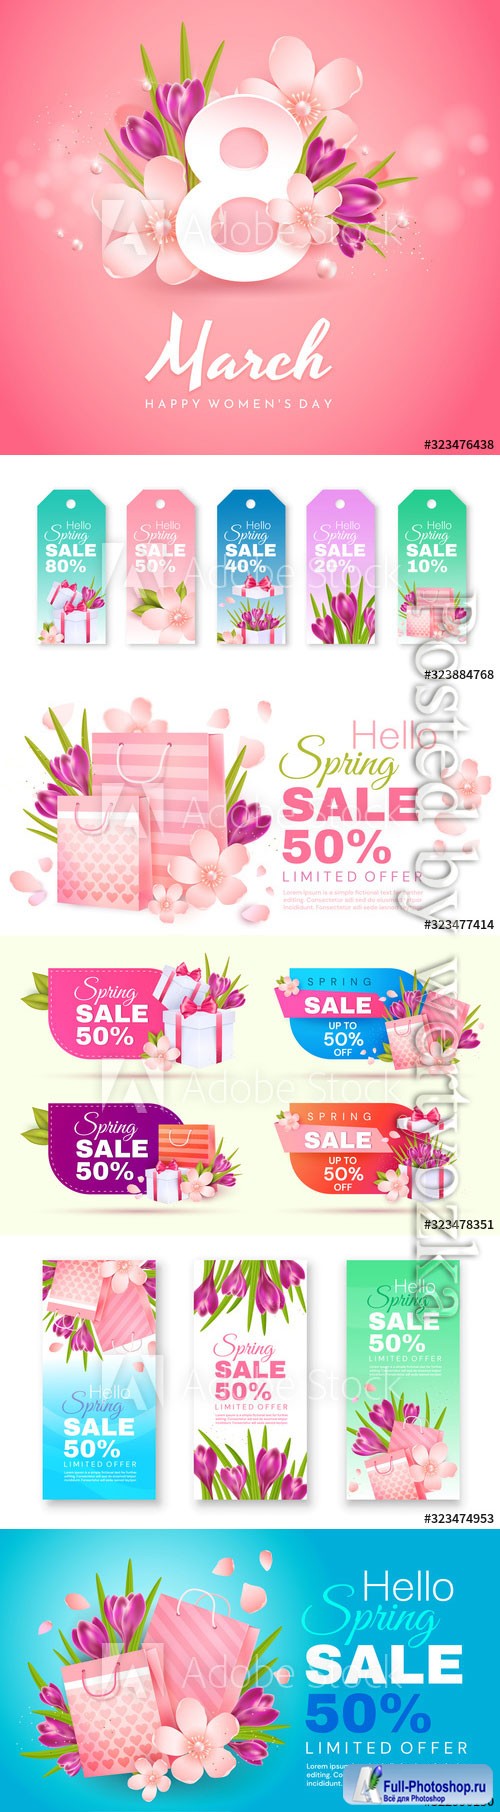 Greeting card for Women's Day, spring sale banners